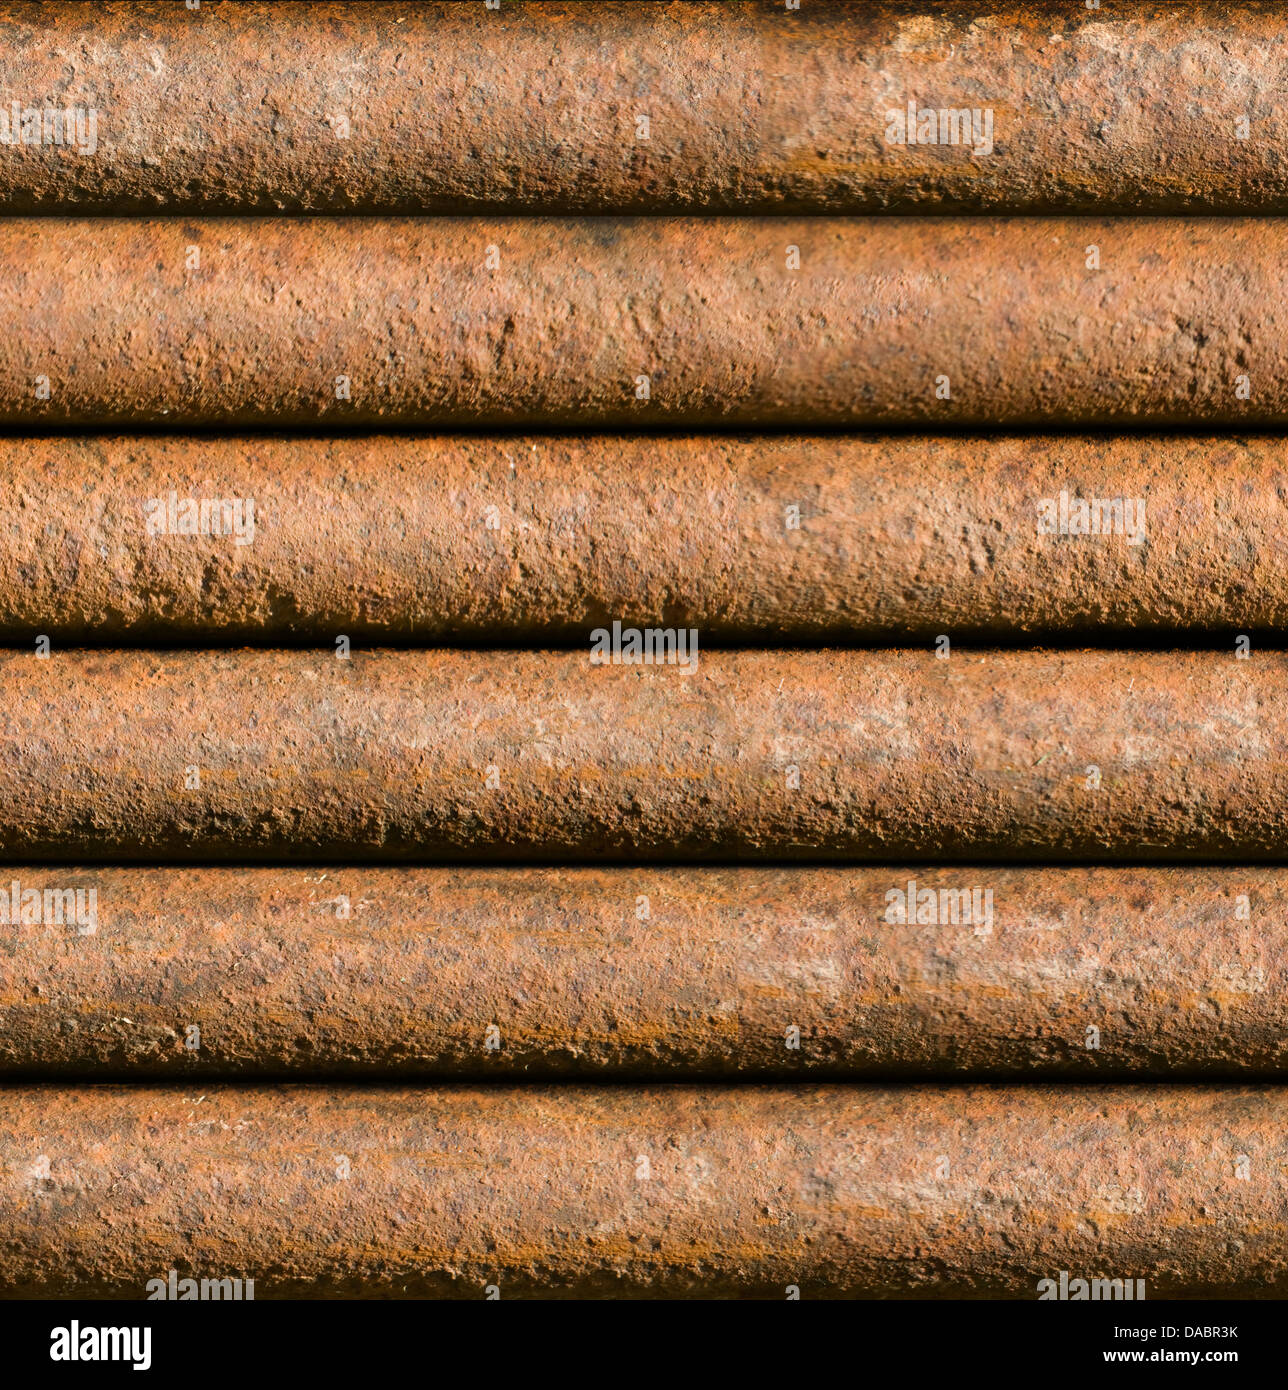 Horizontal rusty pipe background texture seamlessly tileable Stock Photo